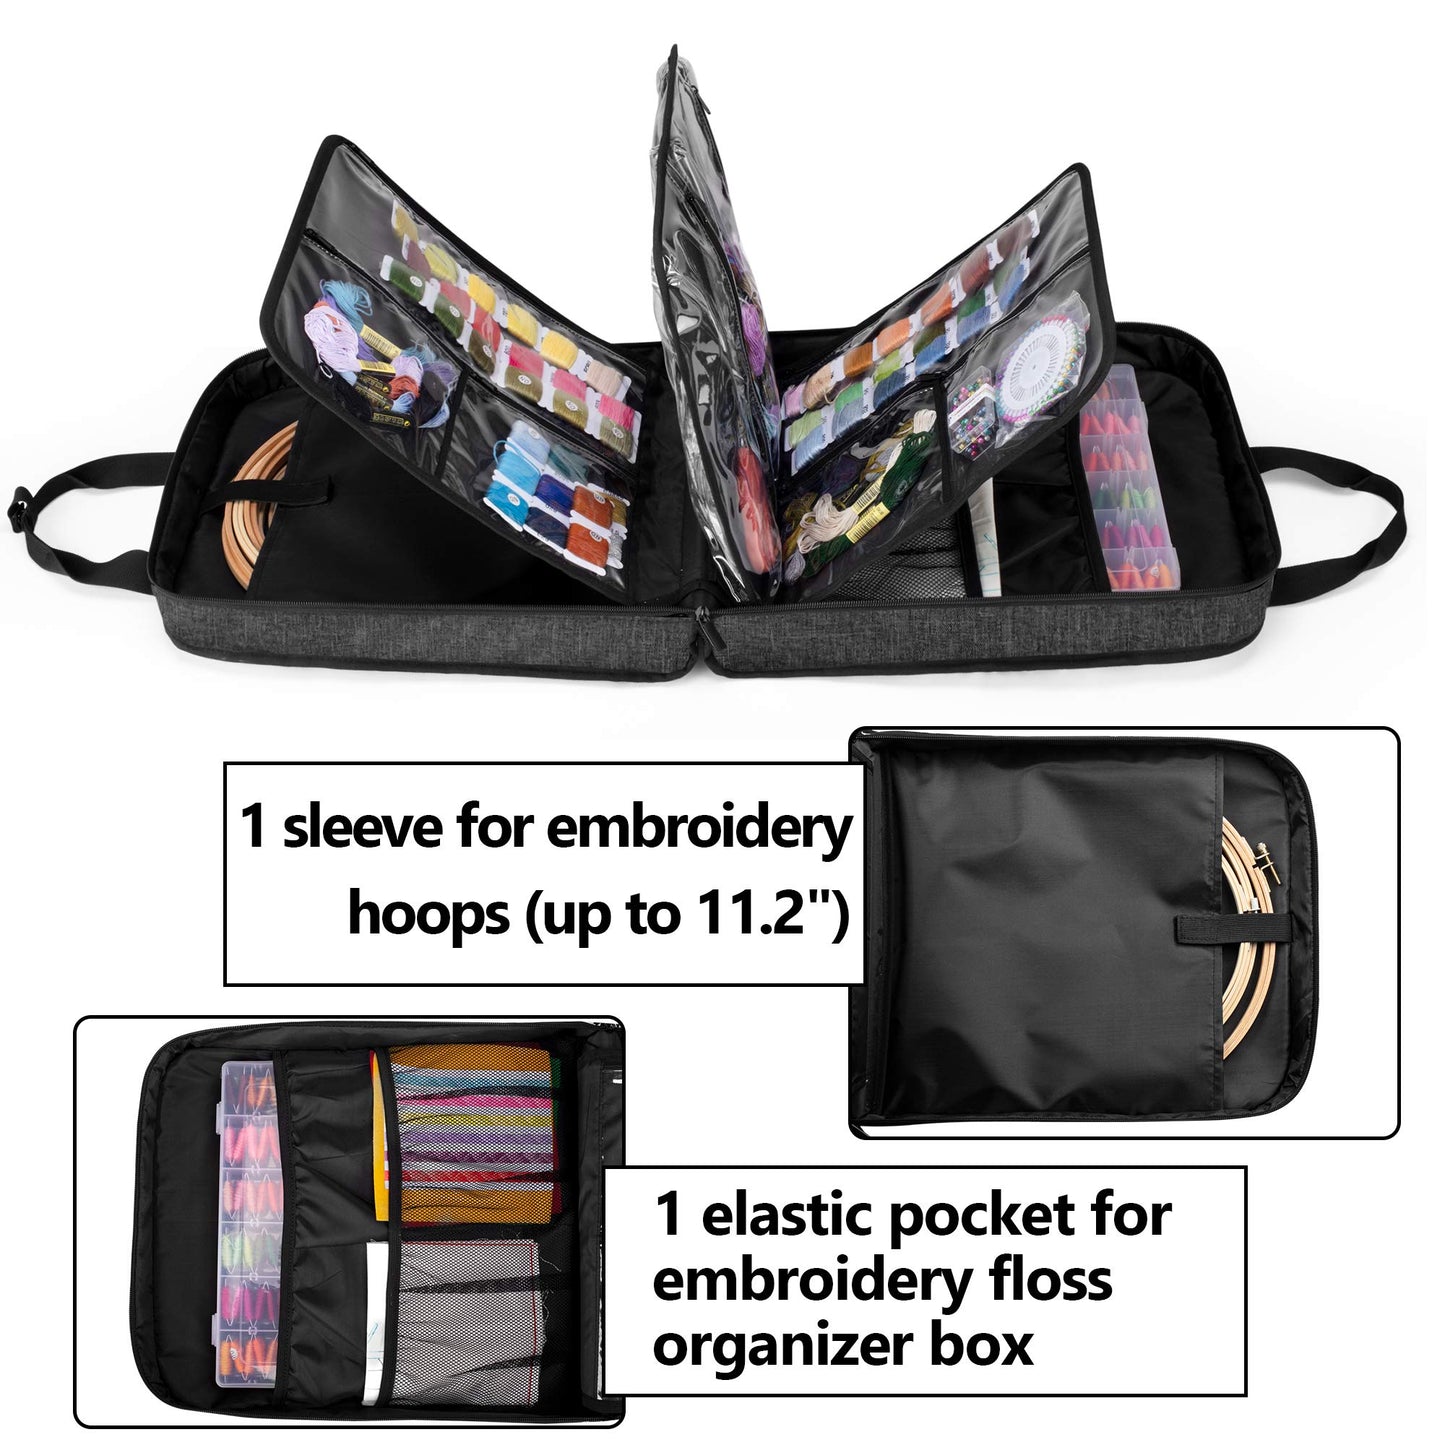 YARWO Embroidery Bag, Embroidery Projects Storage with Multiple Pockets for Embroidery Hoops (Up to 12"), Embroidery Floss and Supplies, Black with Arrow (Bag Only)